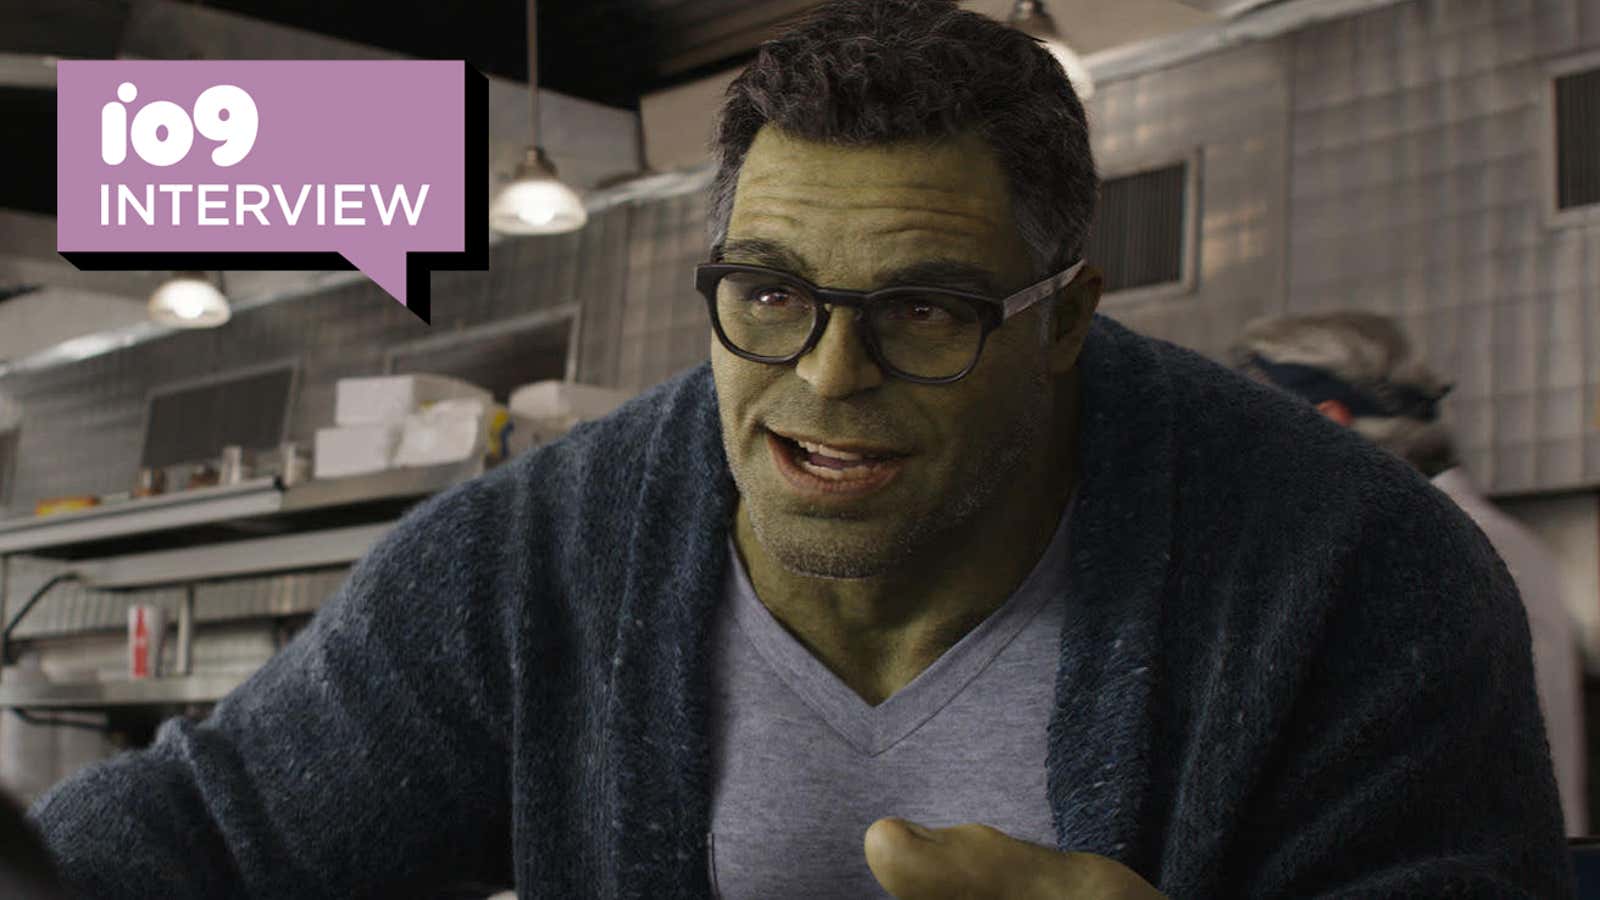 Smart Hulk was one of the biggest challenges for ILM making Avengers: Endgame.